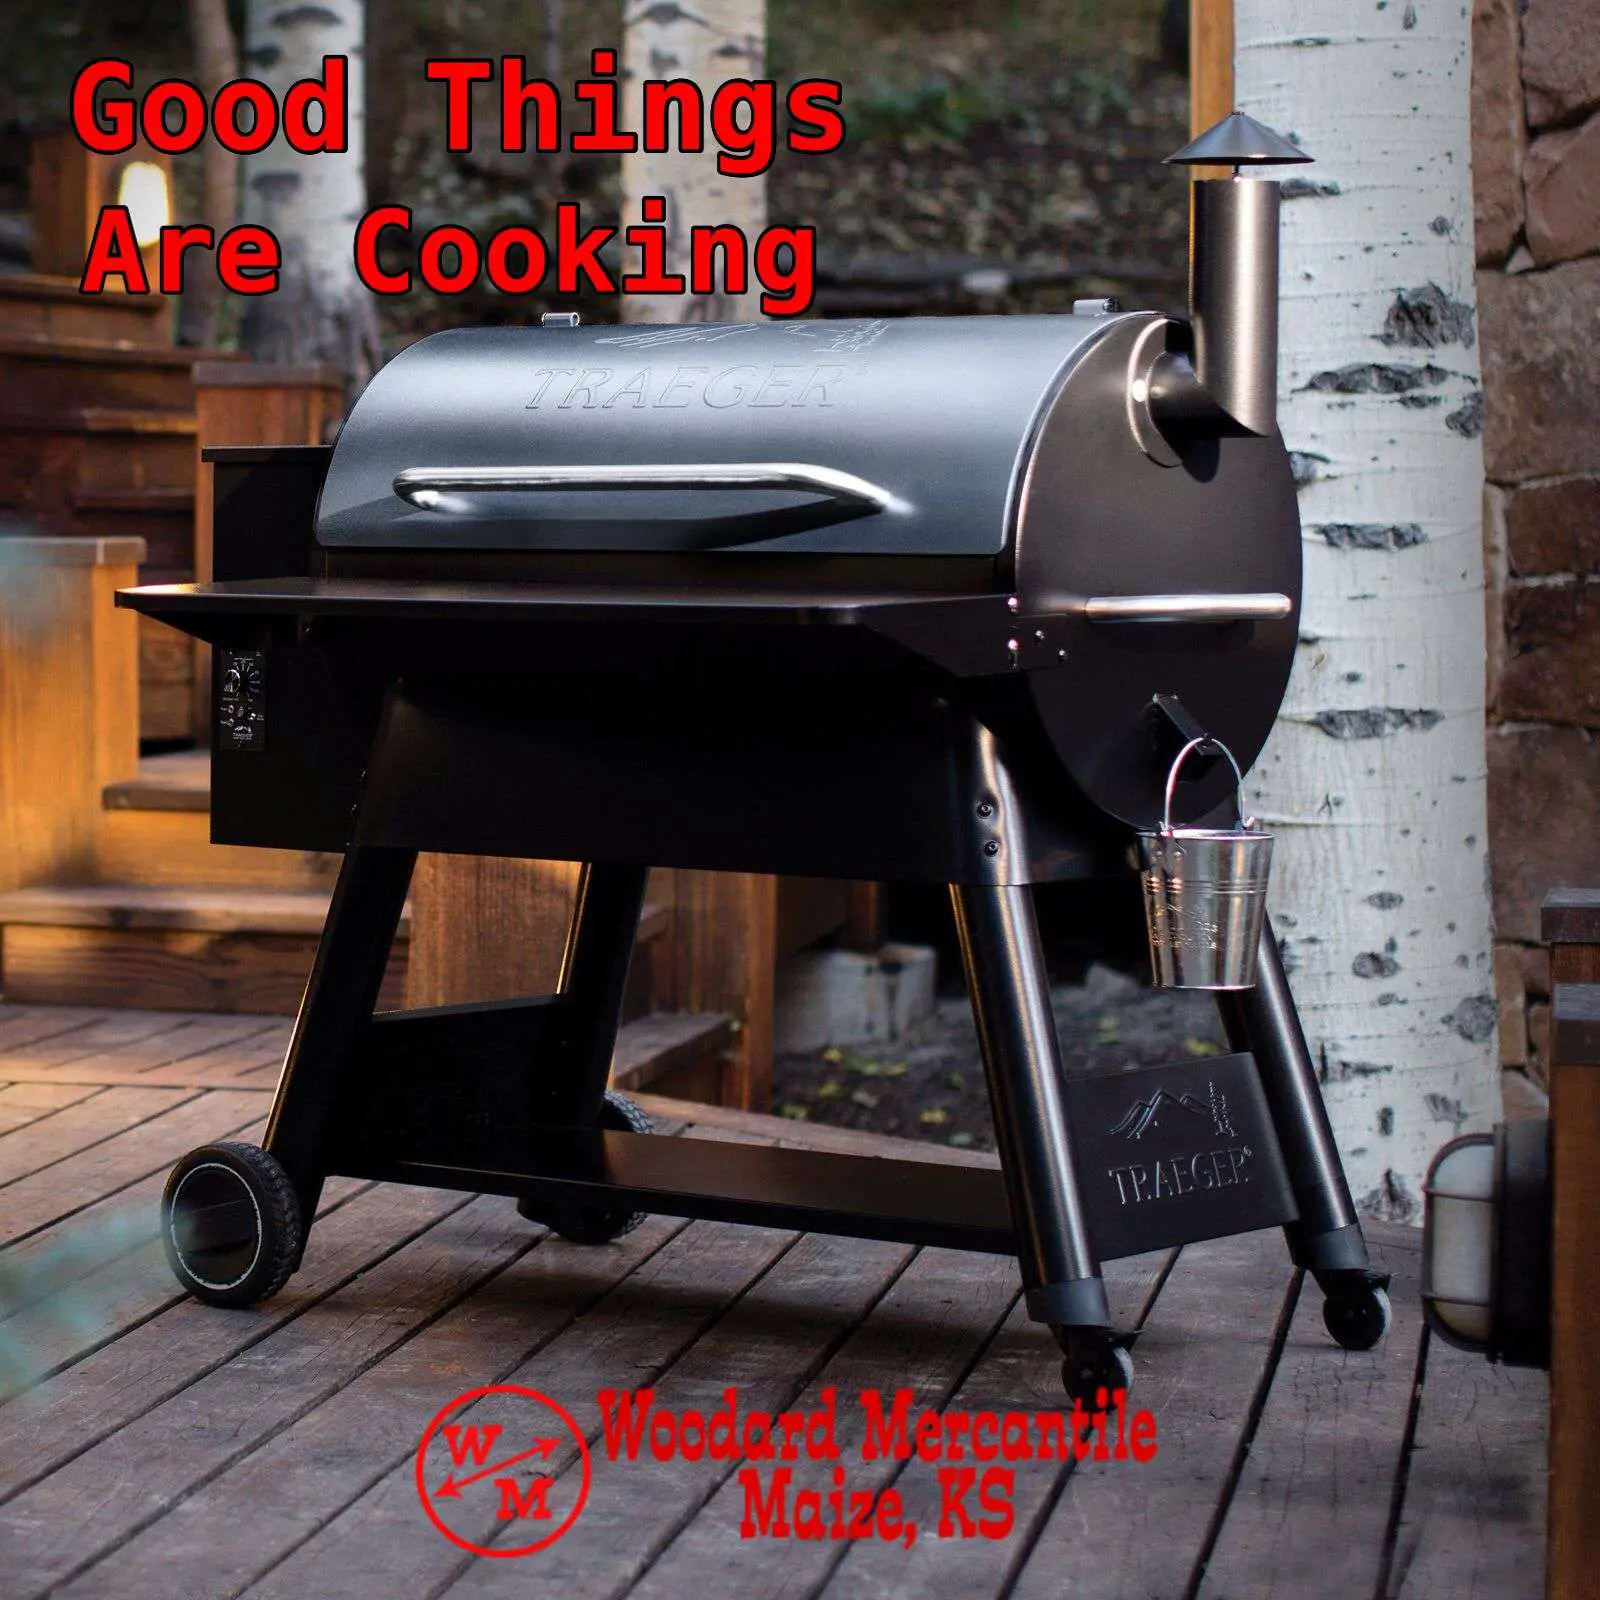 Good things are cooking @ Woodard Mercantile!